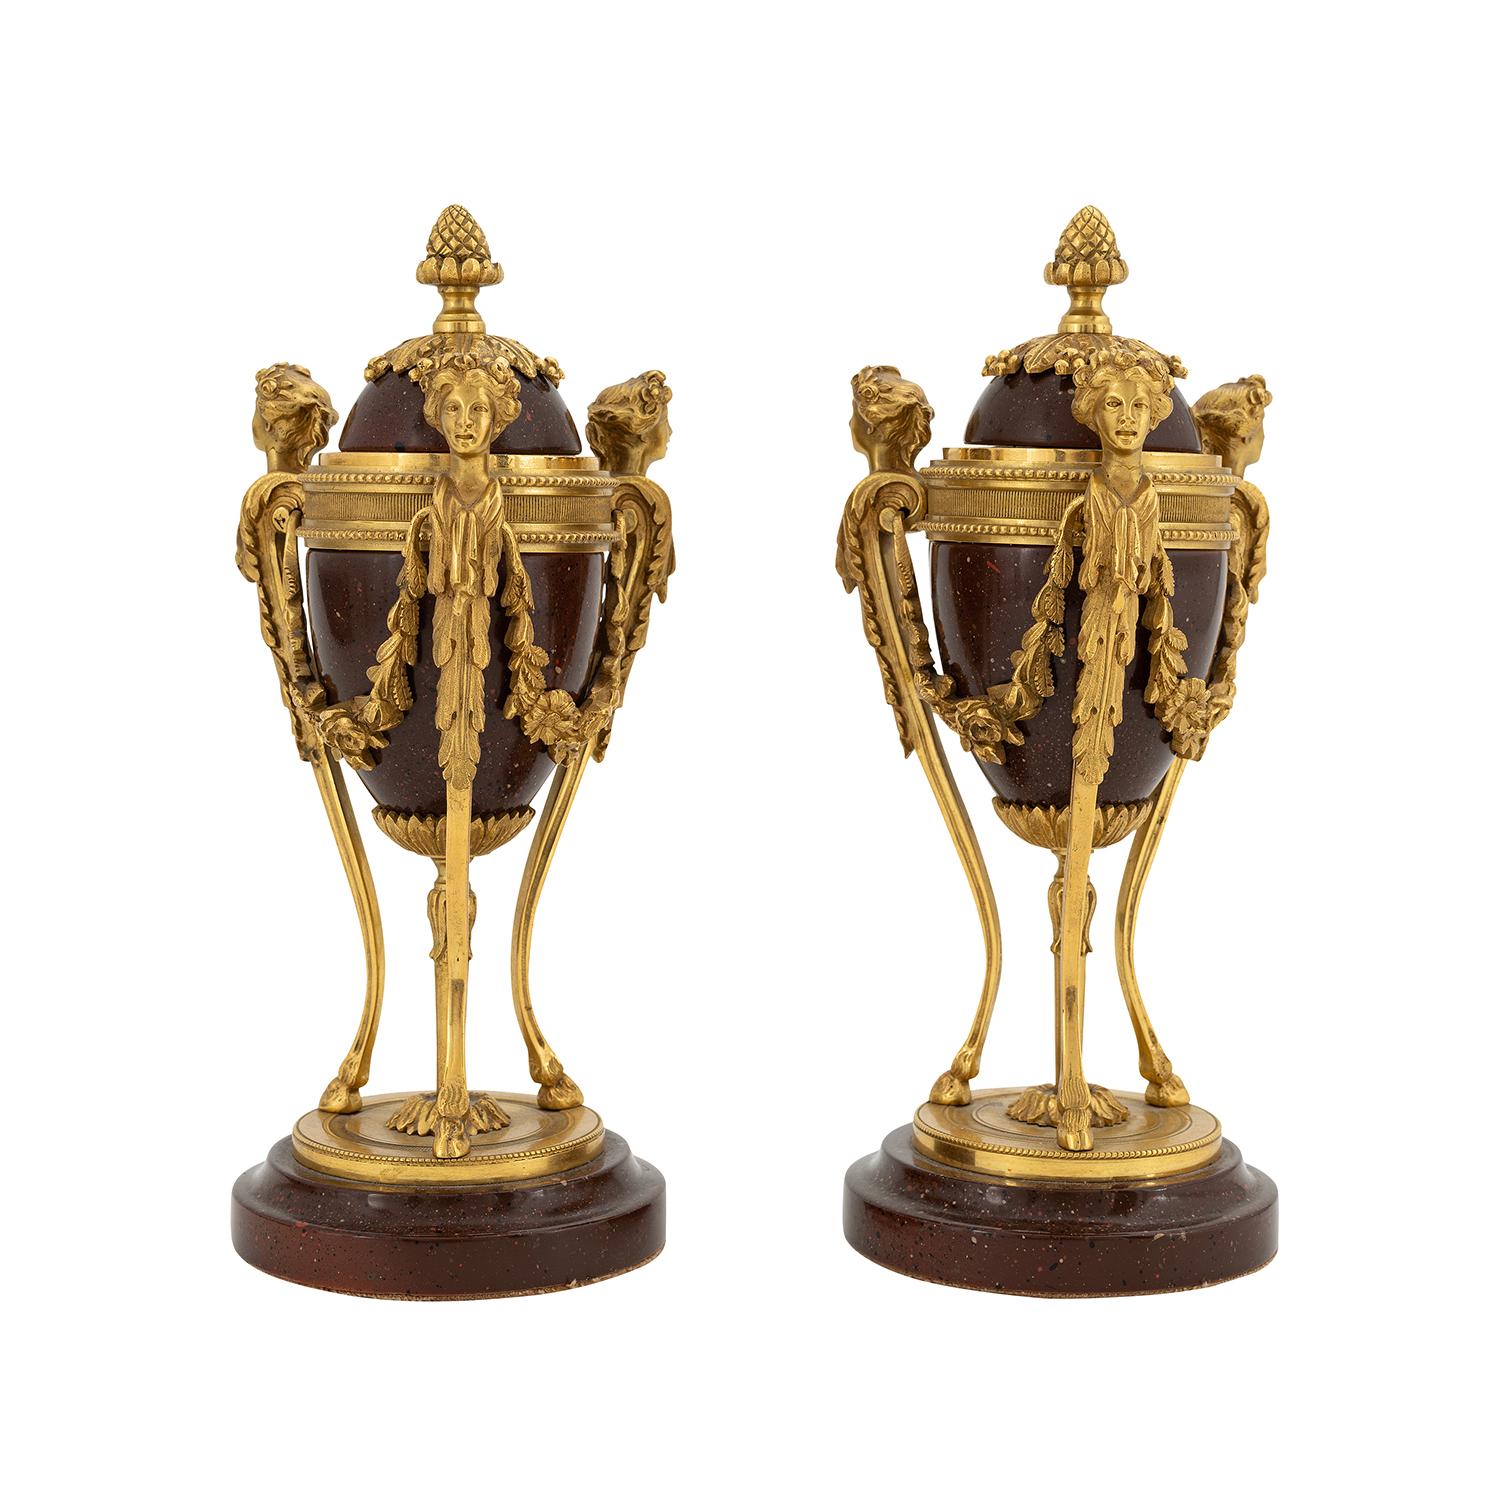 A gold-red, antique French pair of small Cassoulettes made hand crafted porcelain, in good condition. Each of the Parisian Athenians are composed with four gilded bronze maidens, particularized by floral garlands, resting on a round base. The décor